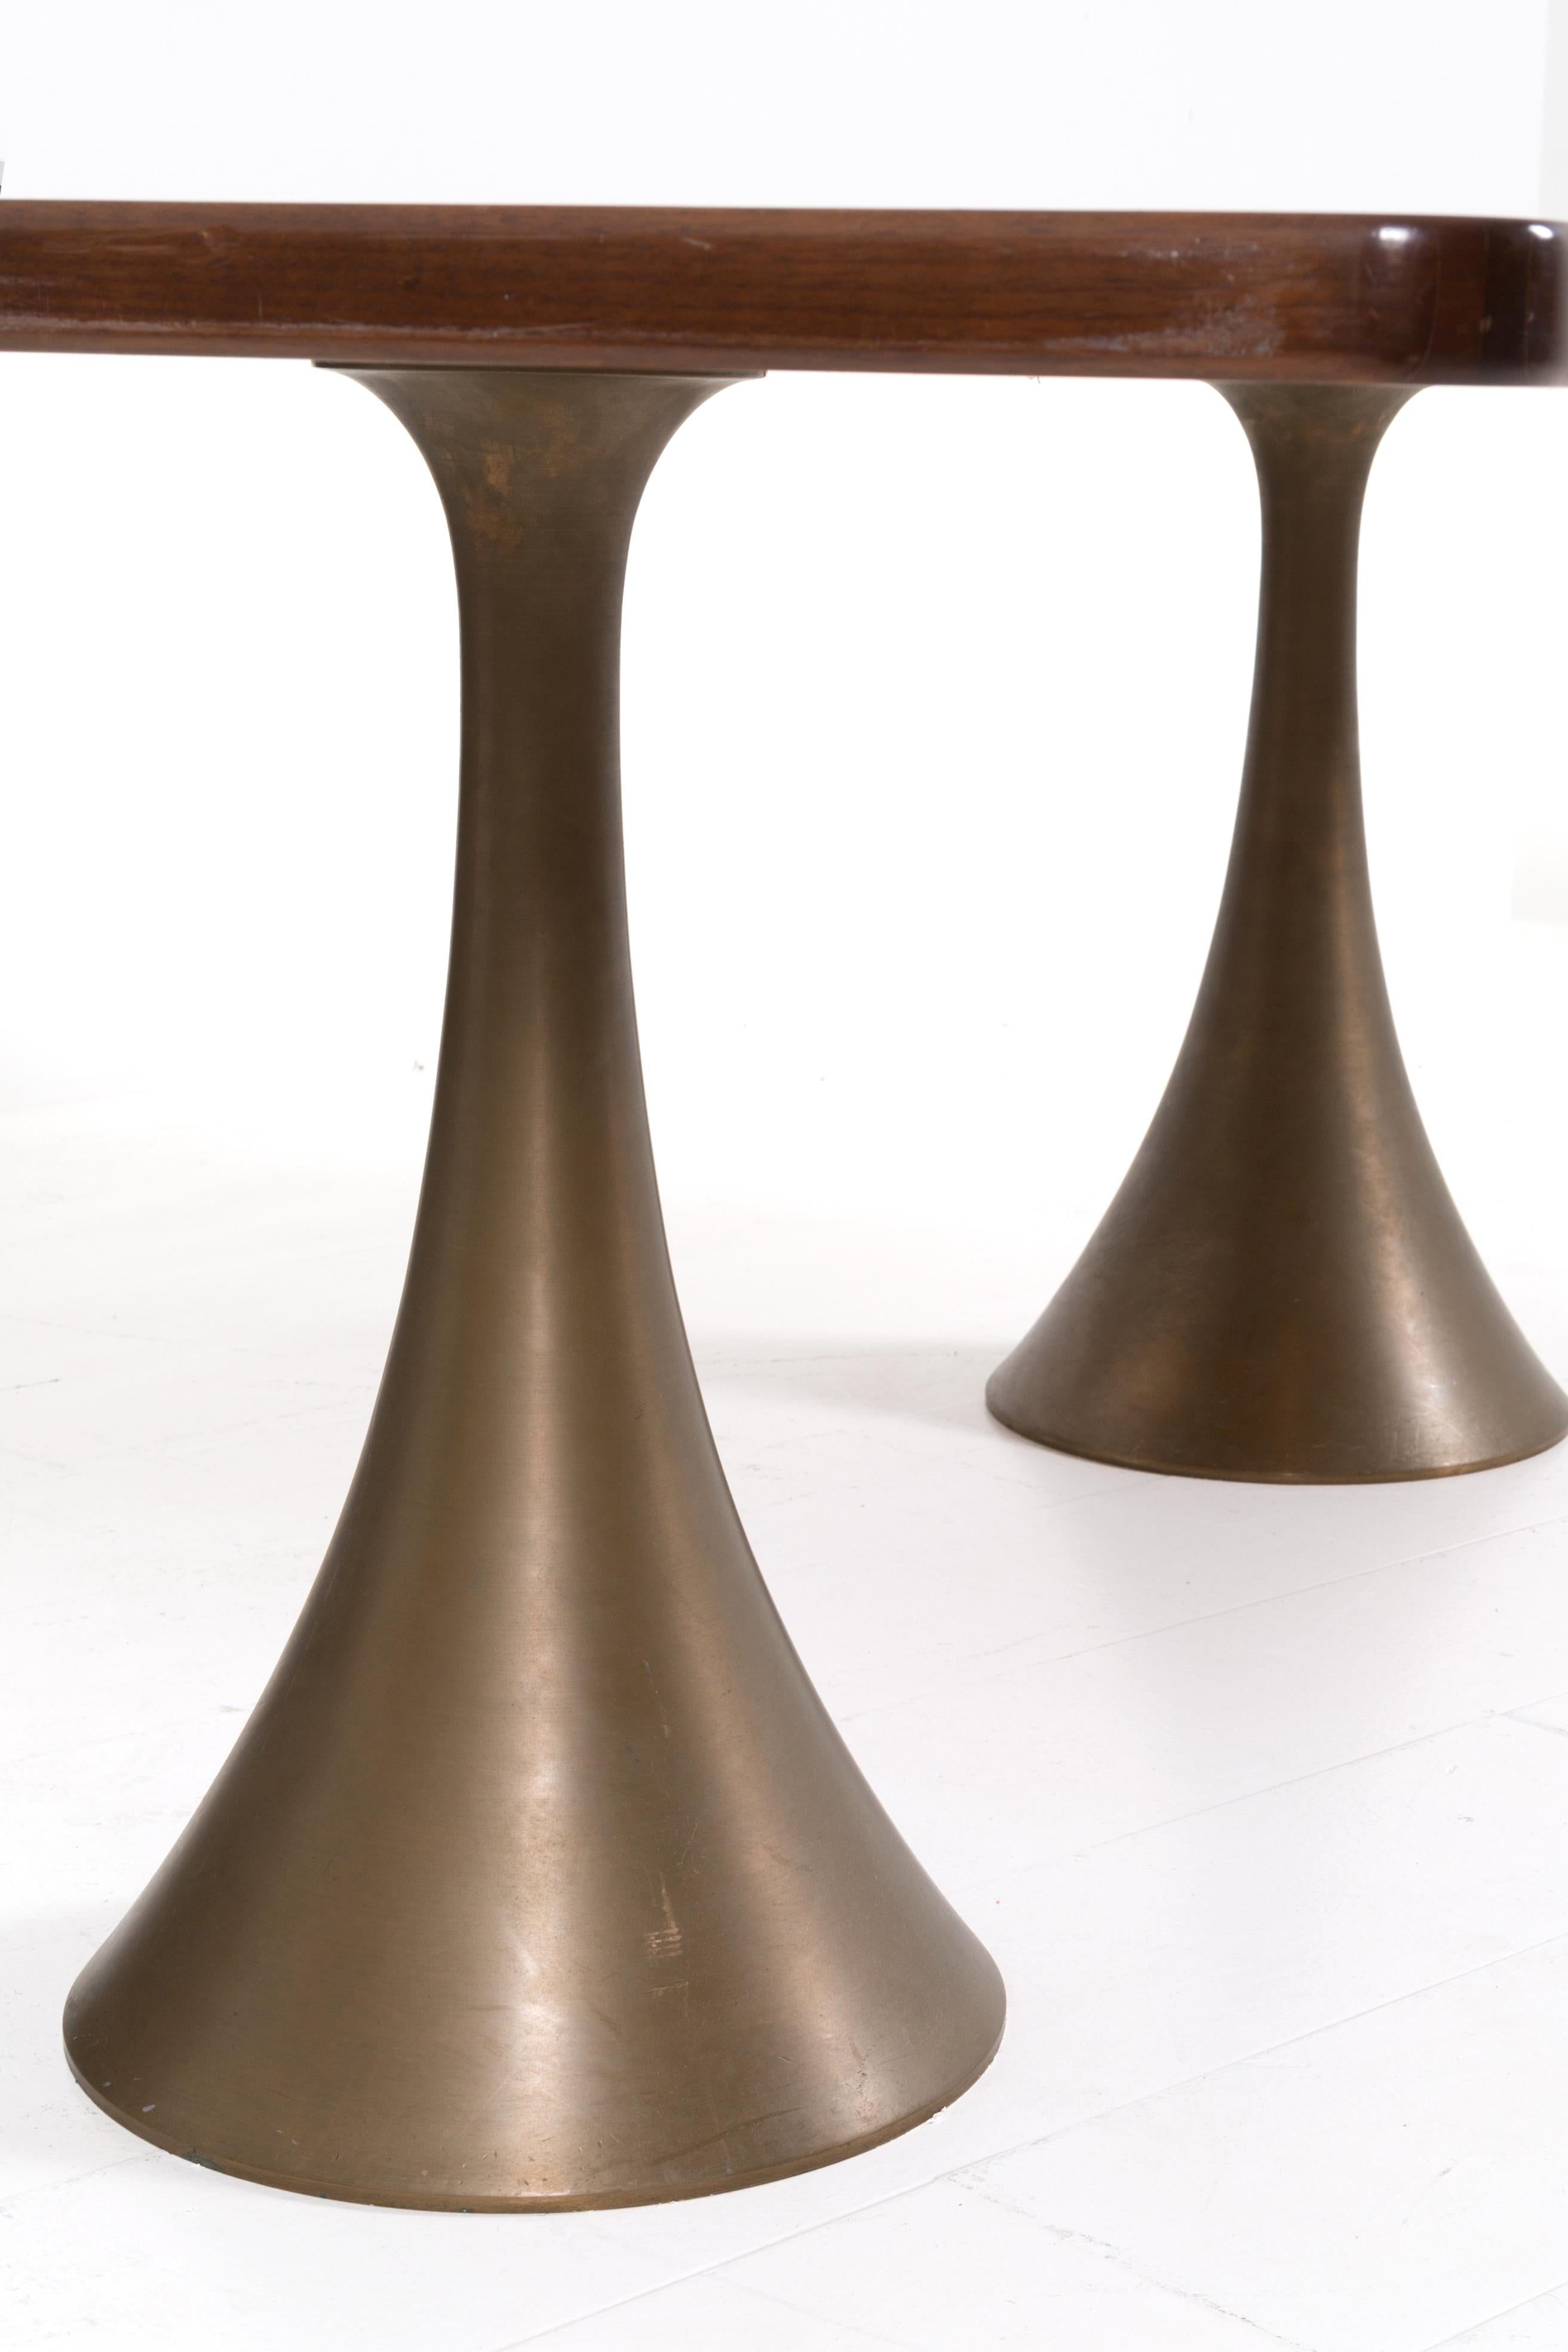 Rare and important table designed and made by Osvaldo Borsani in 1971. The table has a thick wooden top. The peculiarity and uniqueness of the table are its trumpet-shaped pedestals and supports made entirely of bronze. The importance of the table